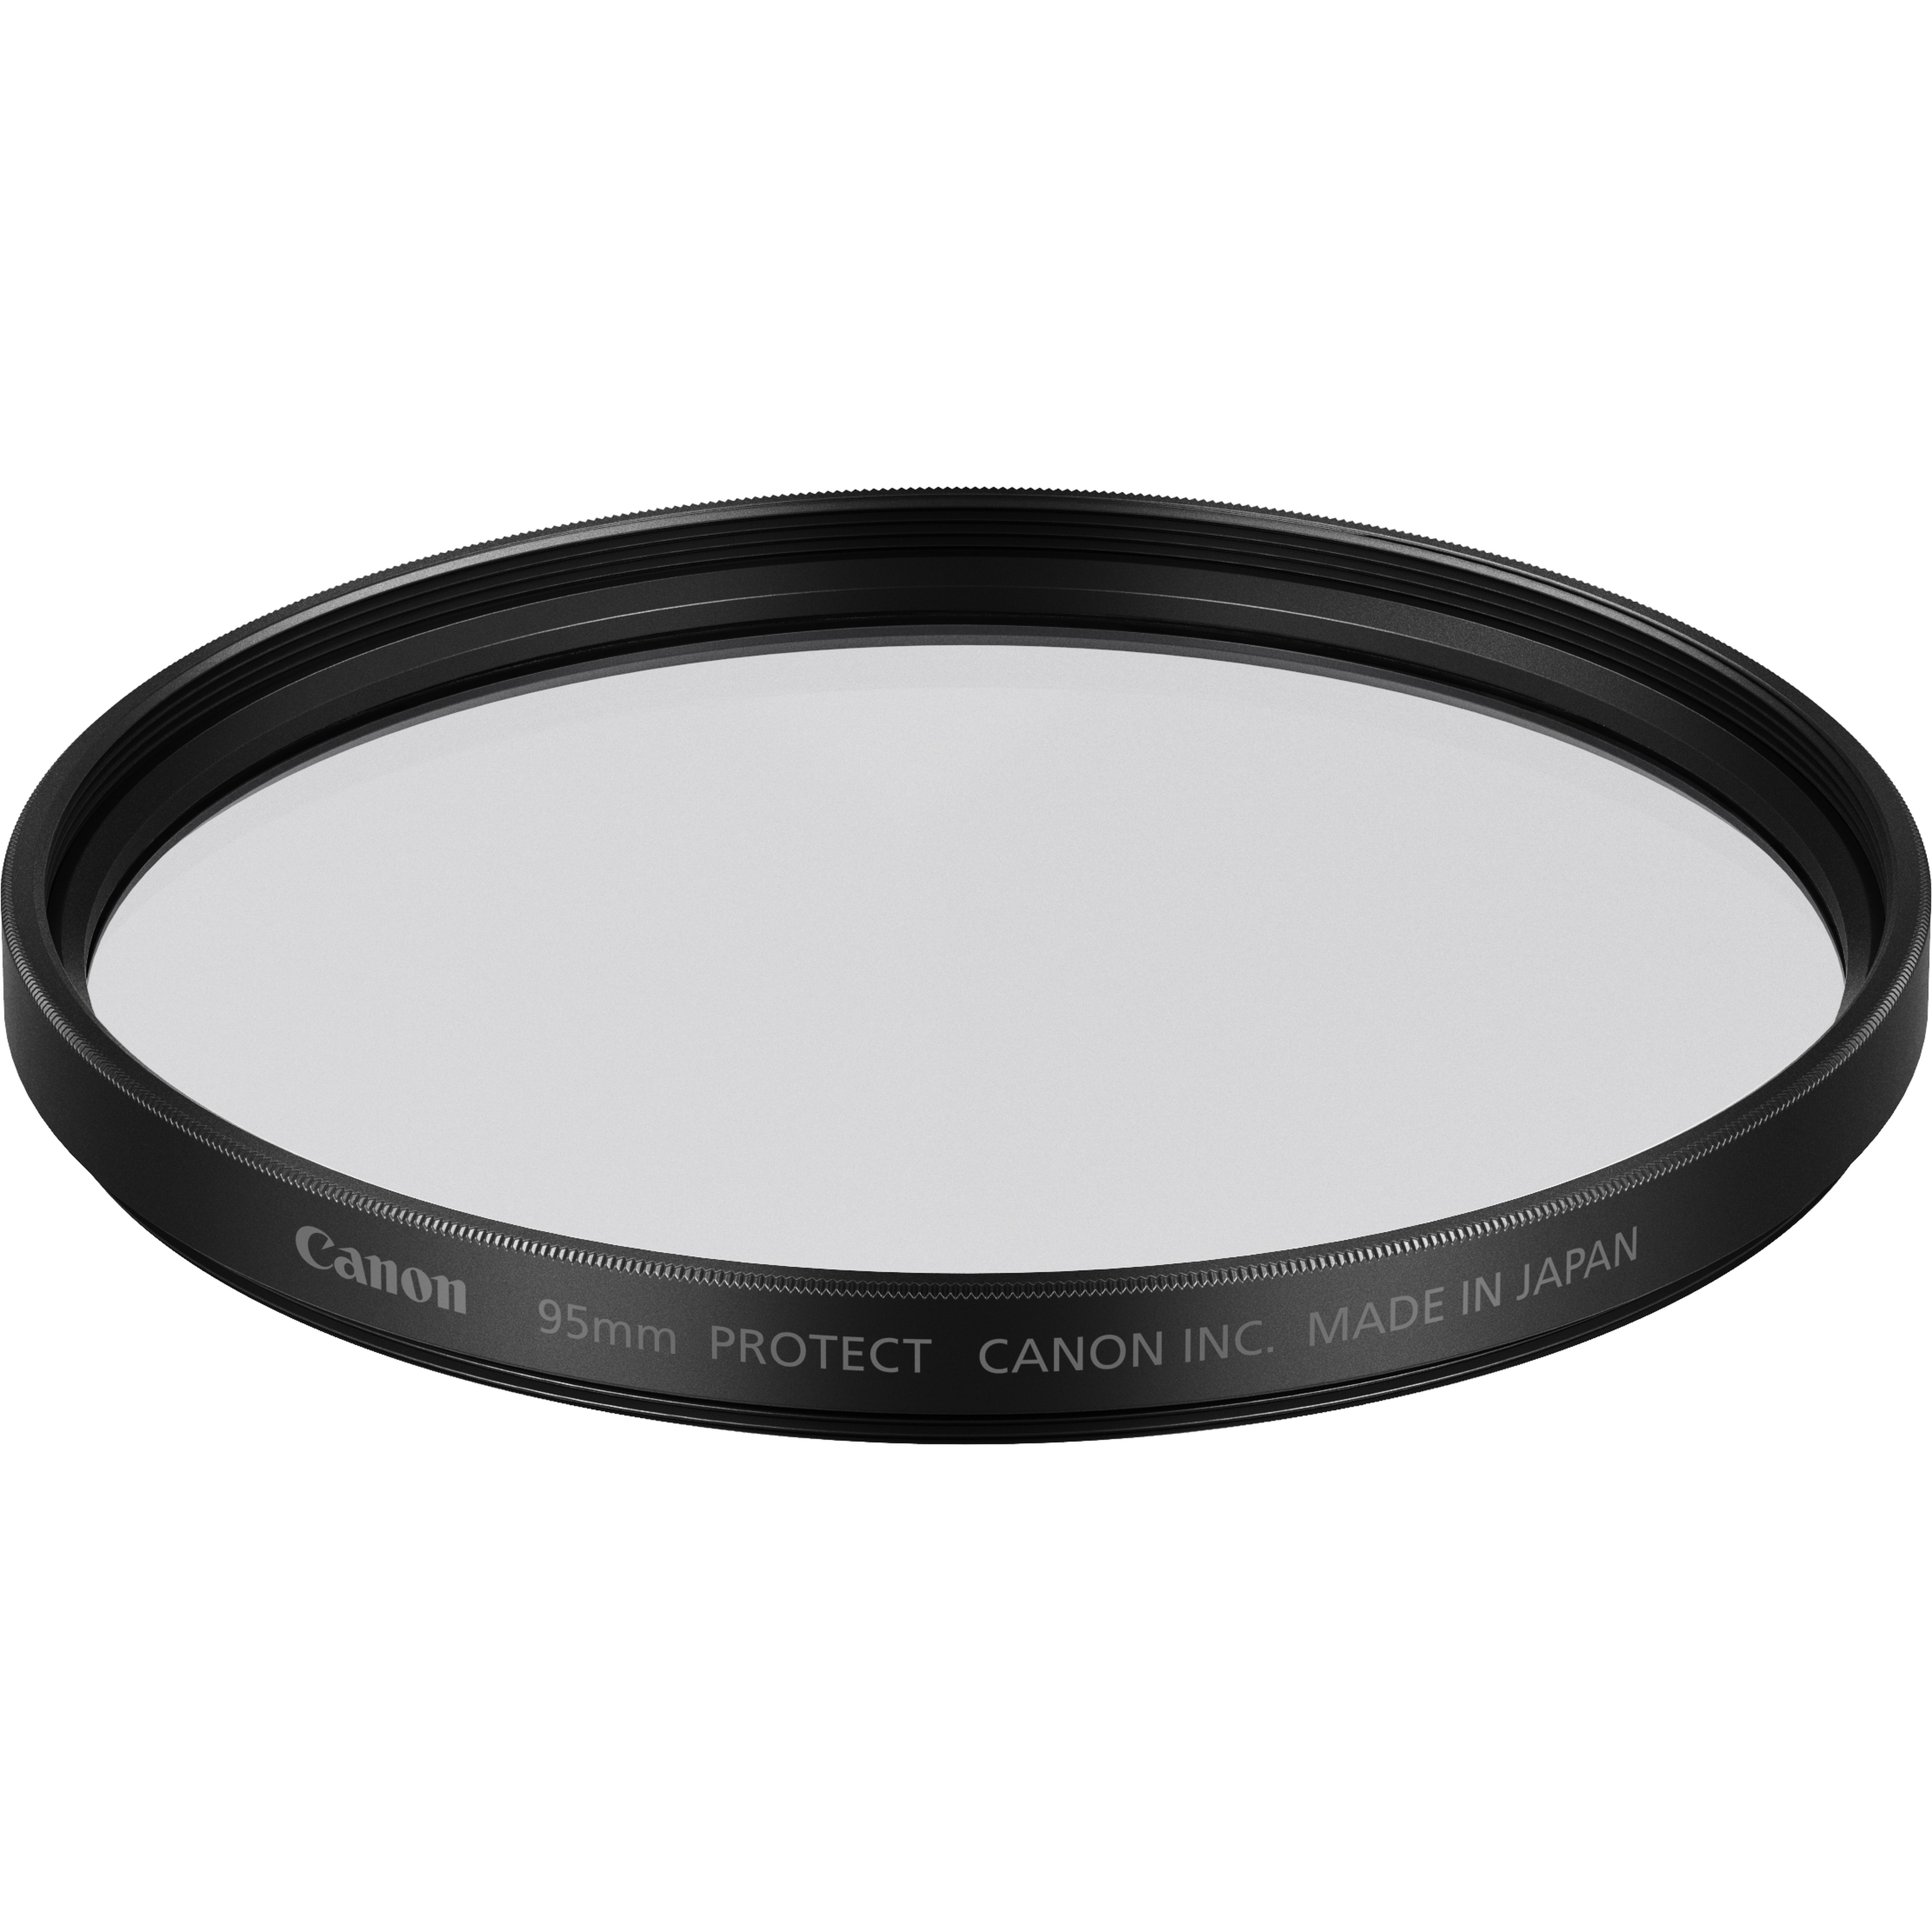 Canon - Filter - protection - clear - 95 mm